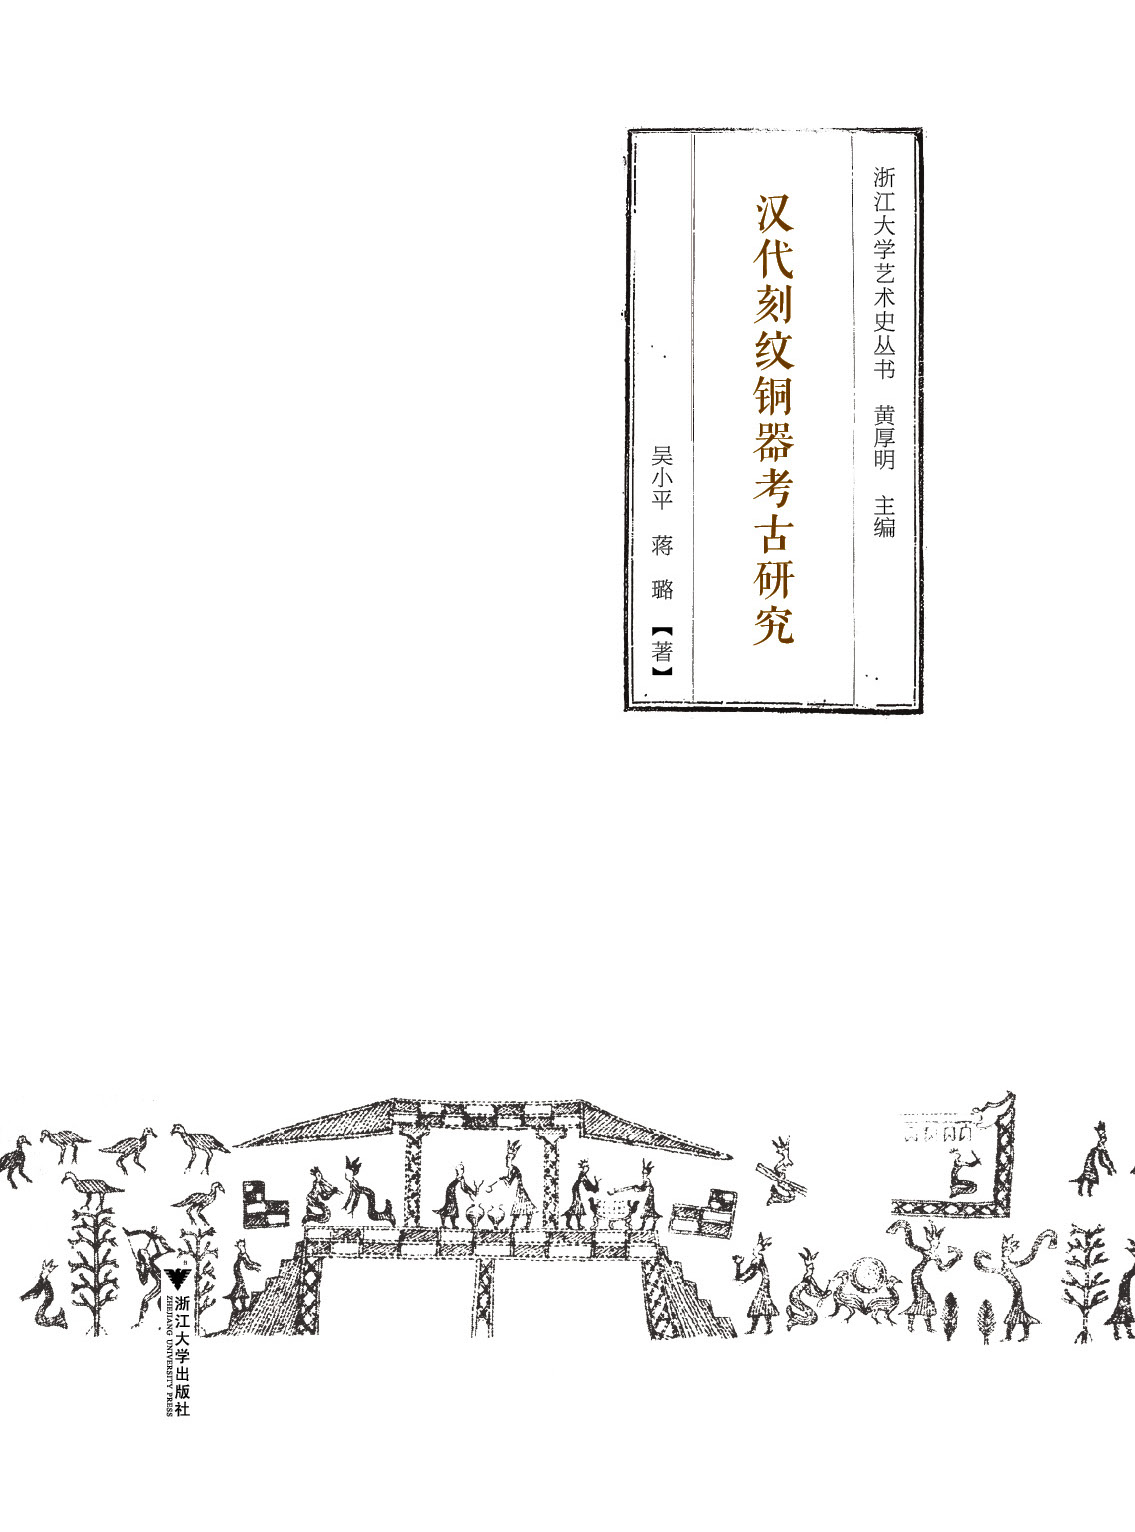 Archaeological Studies of the Engraved Bronzes in the Han Dynasty